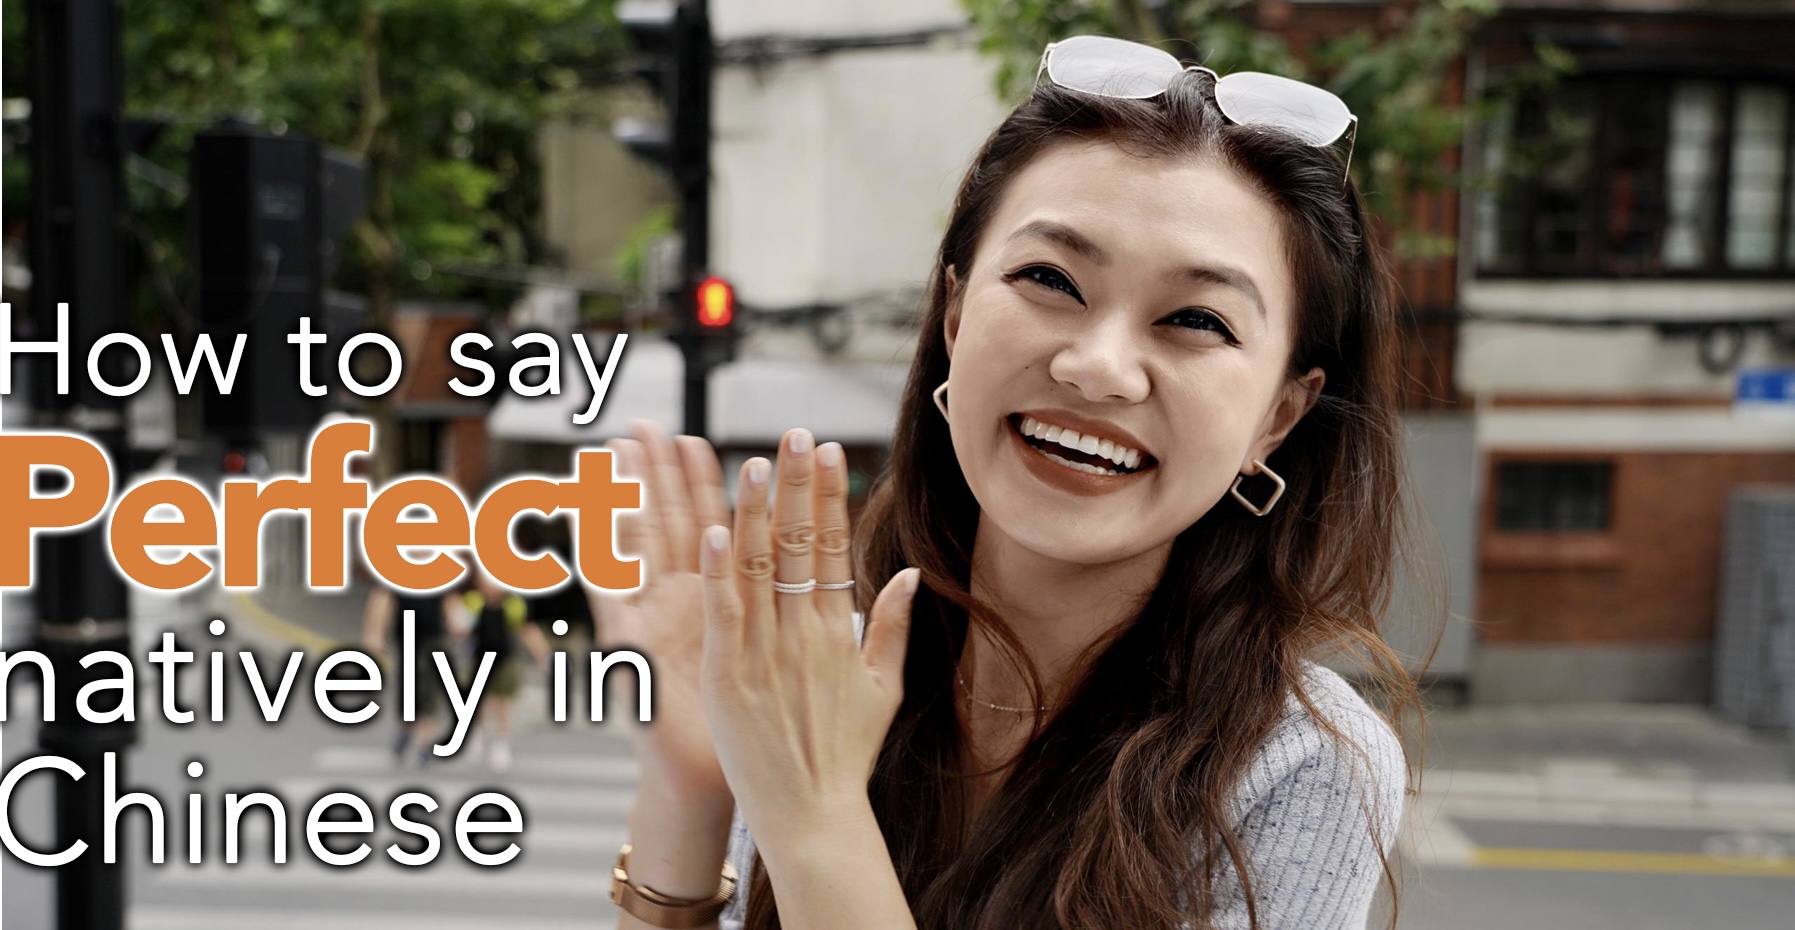 How to Say Perfect in Chinese?